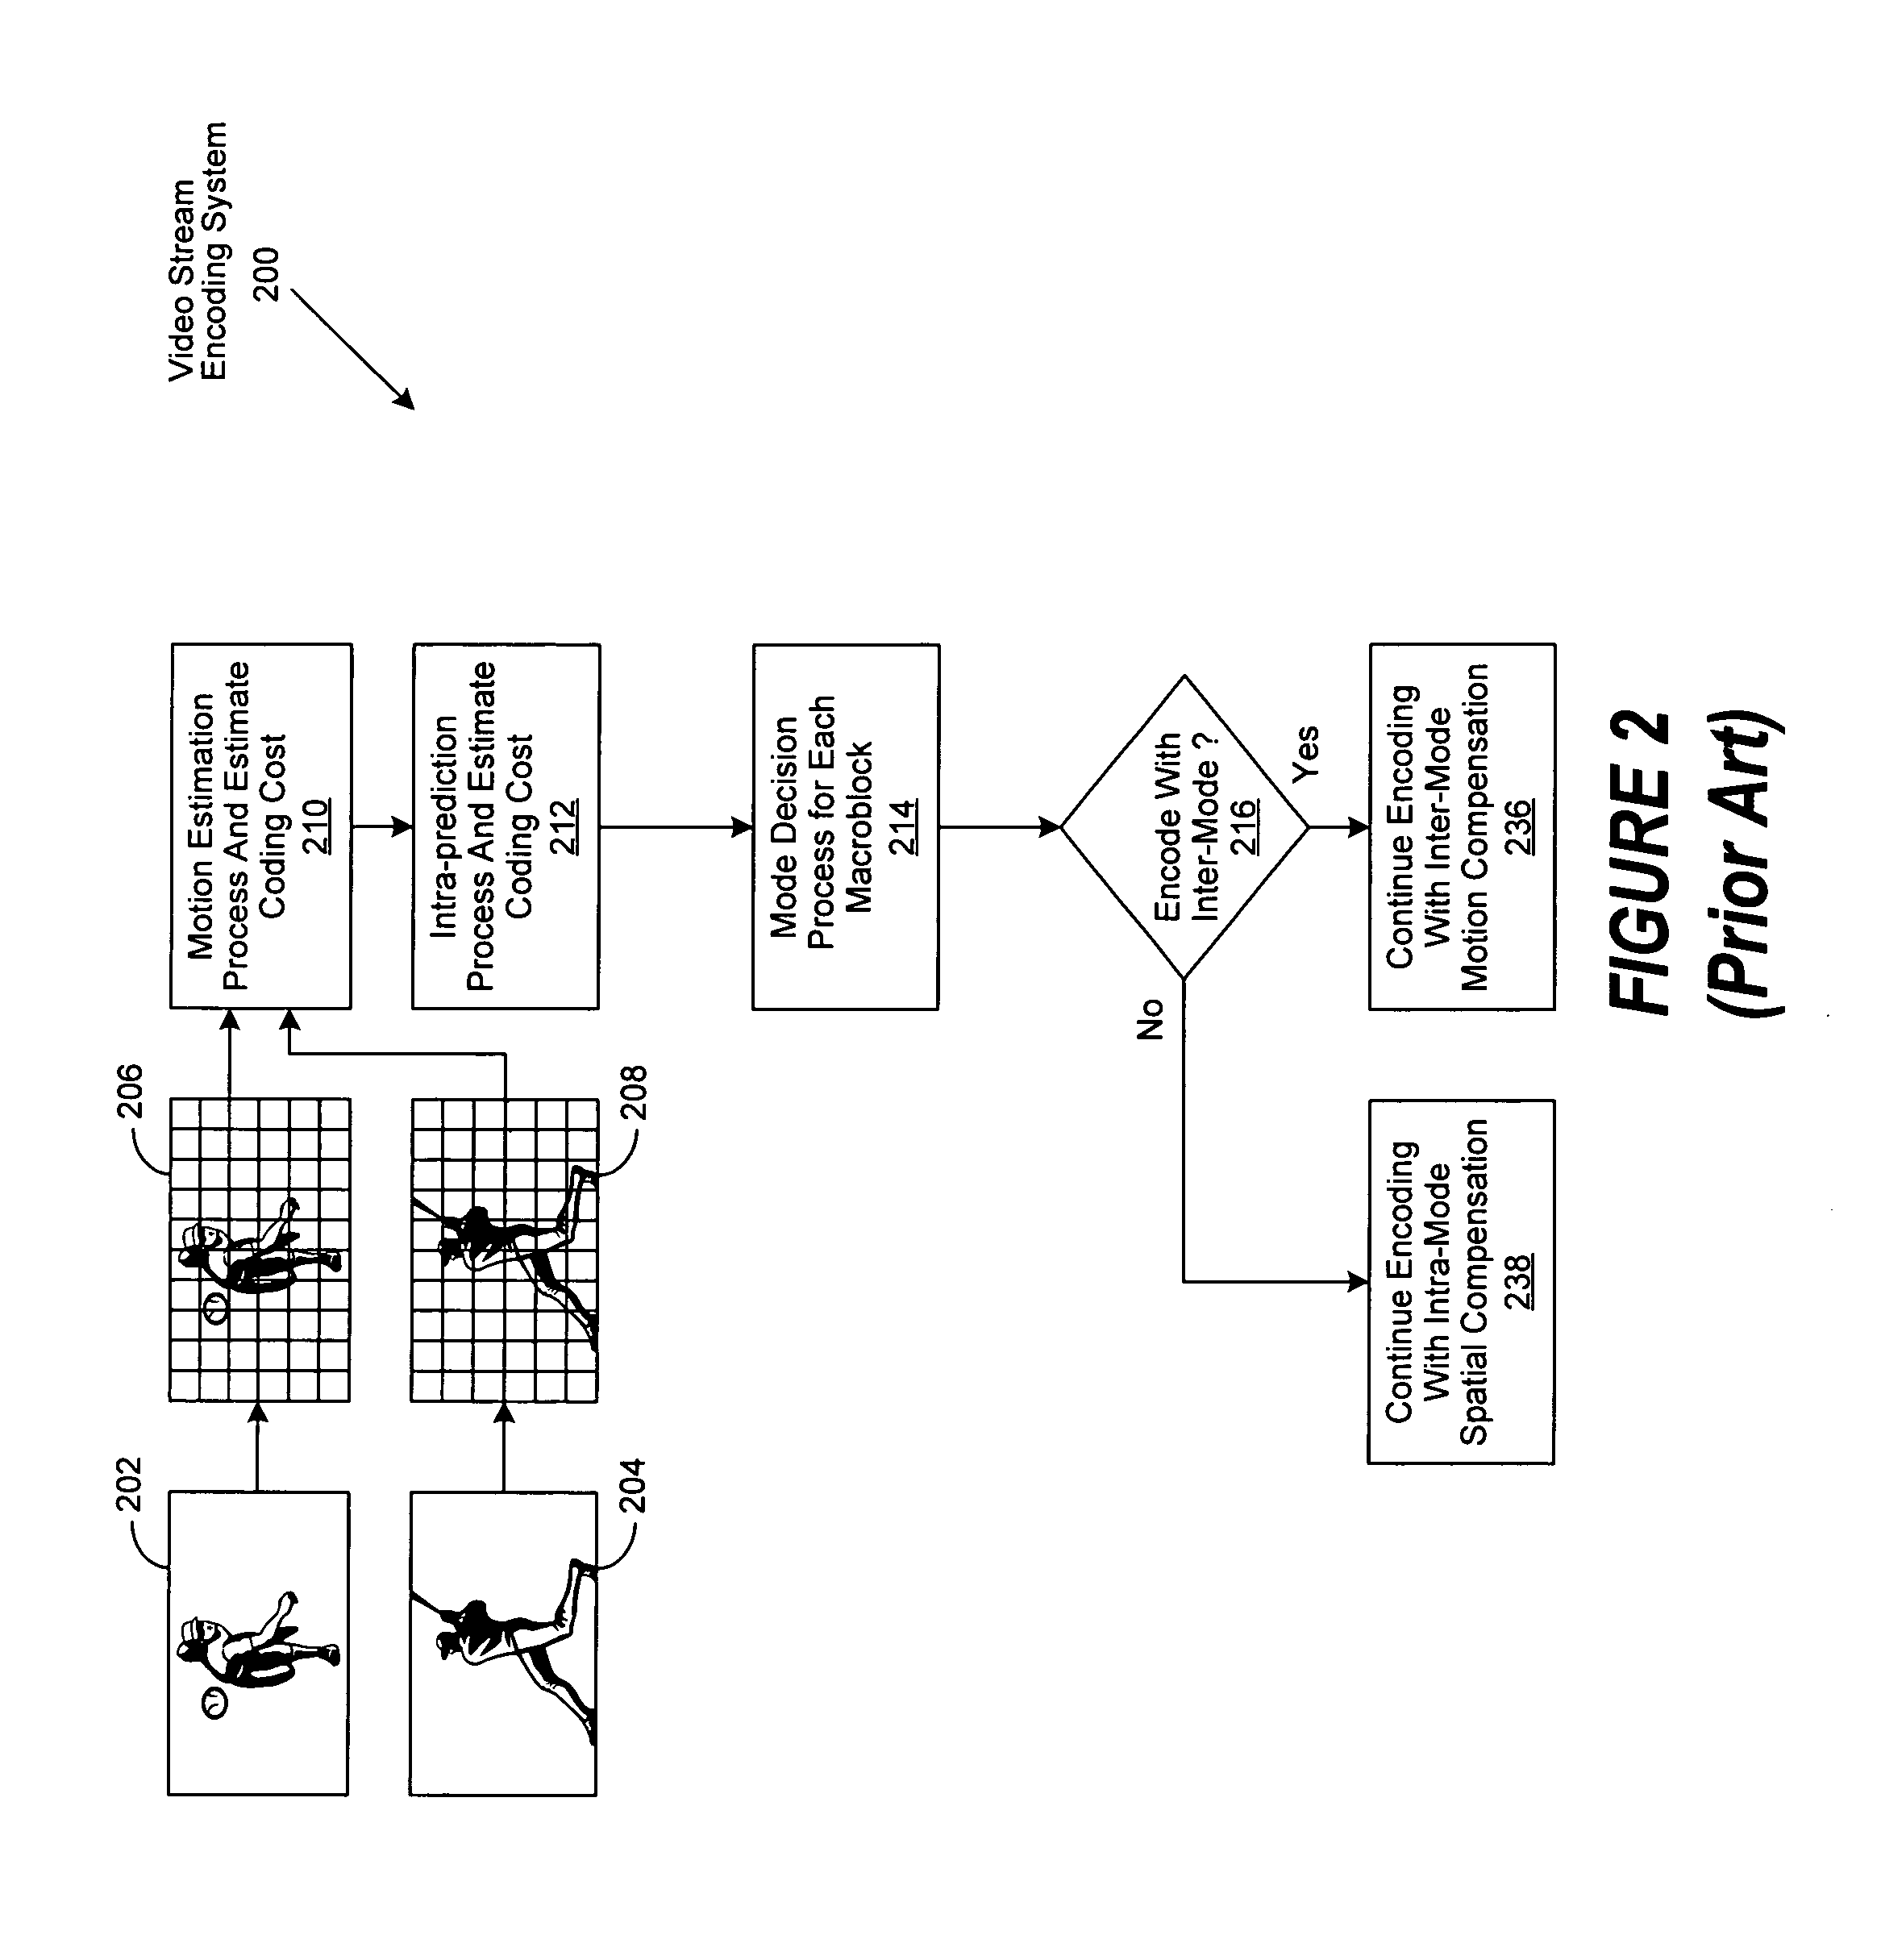 Method of increasing coding efficiency and reducing power consumption by on-line scene change detection while encoding inter-frame